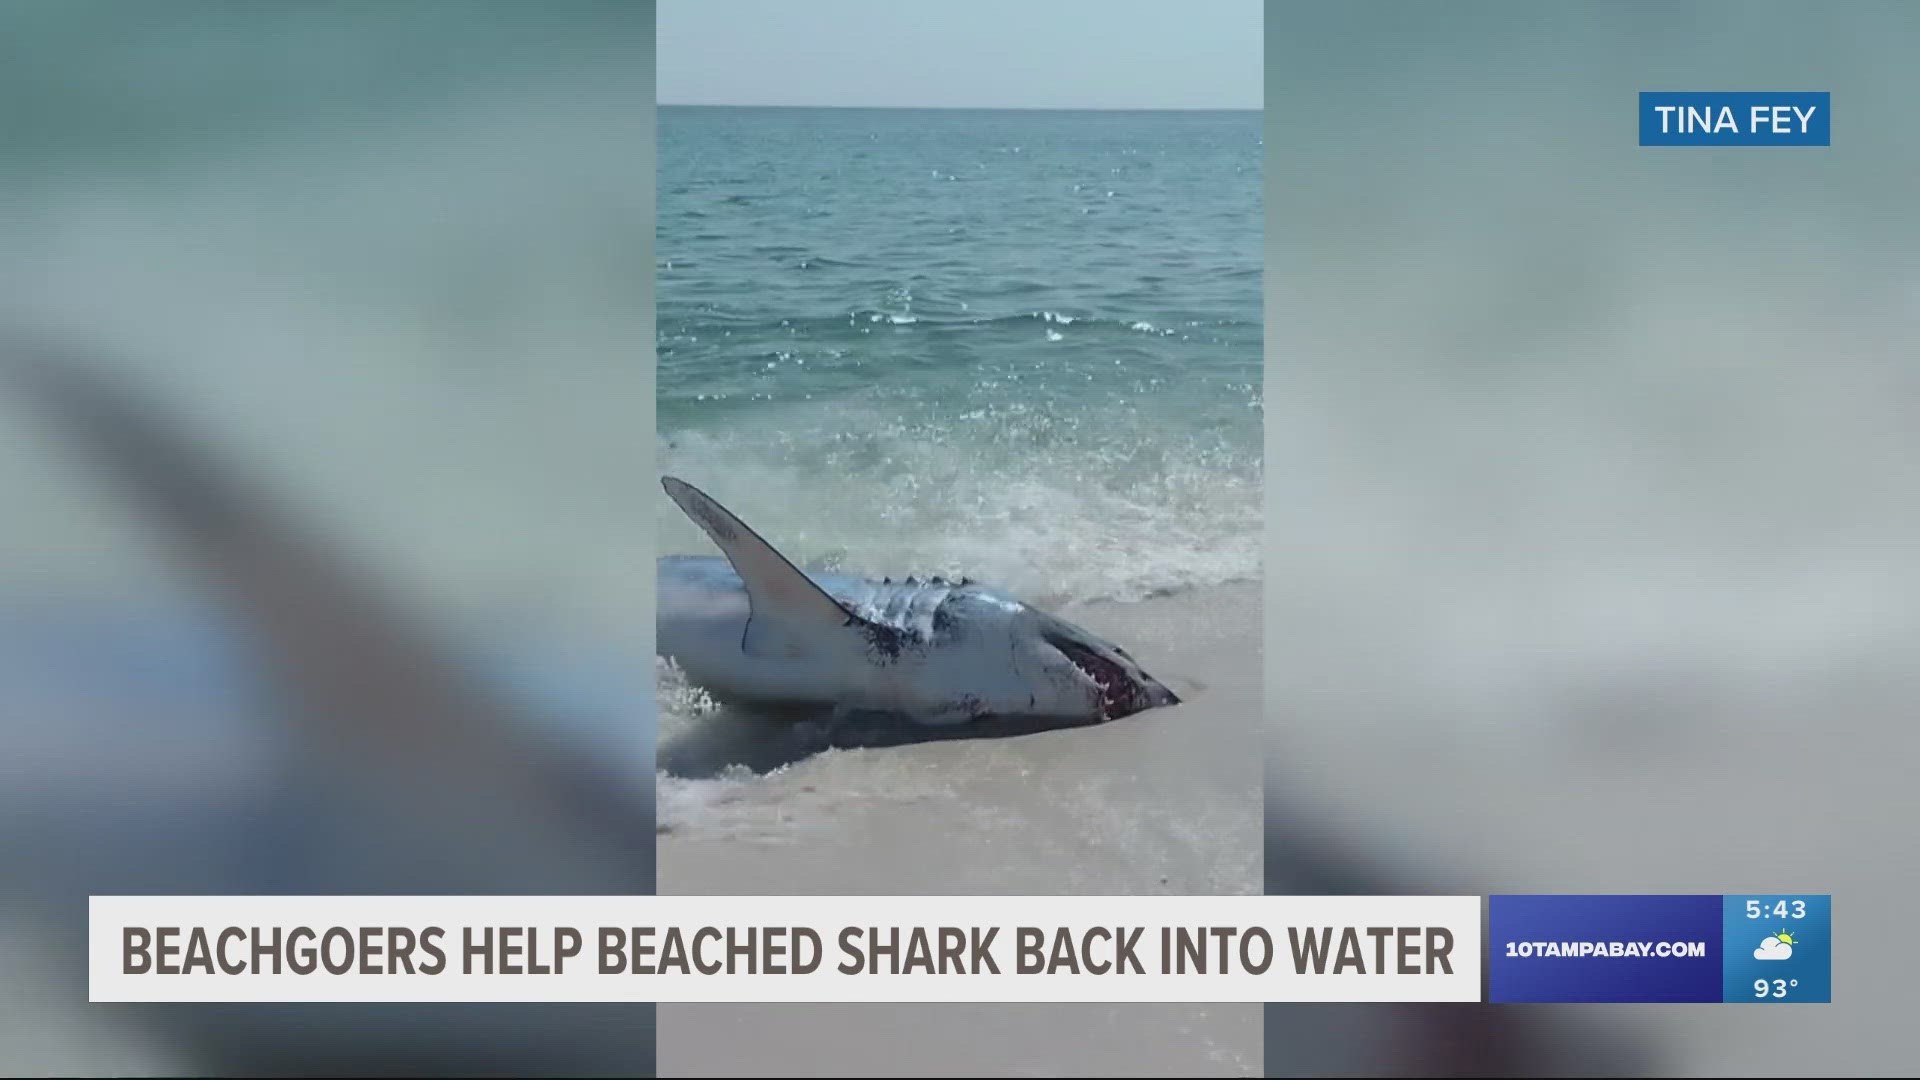 Tina Fey said in a Facebook post that the shark just showed up while they were swimming.